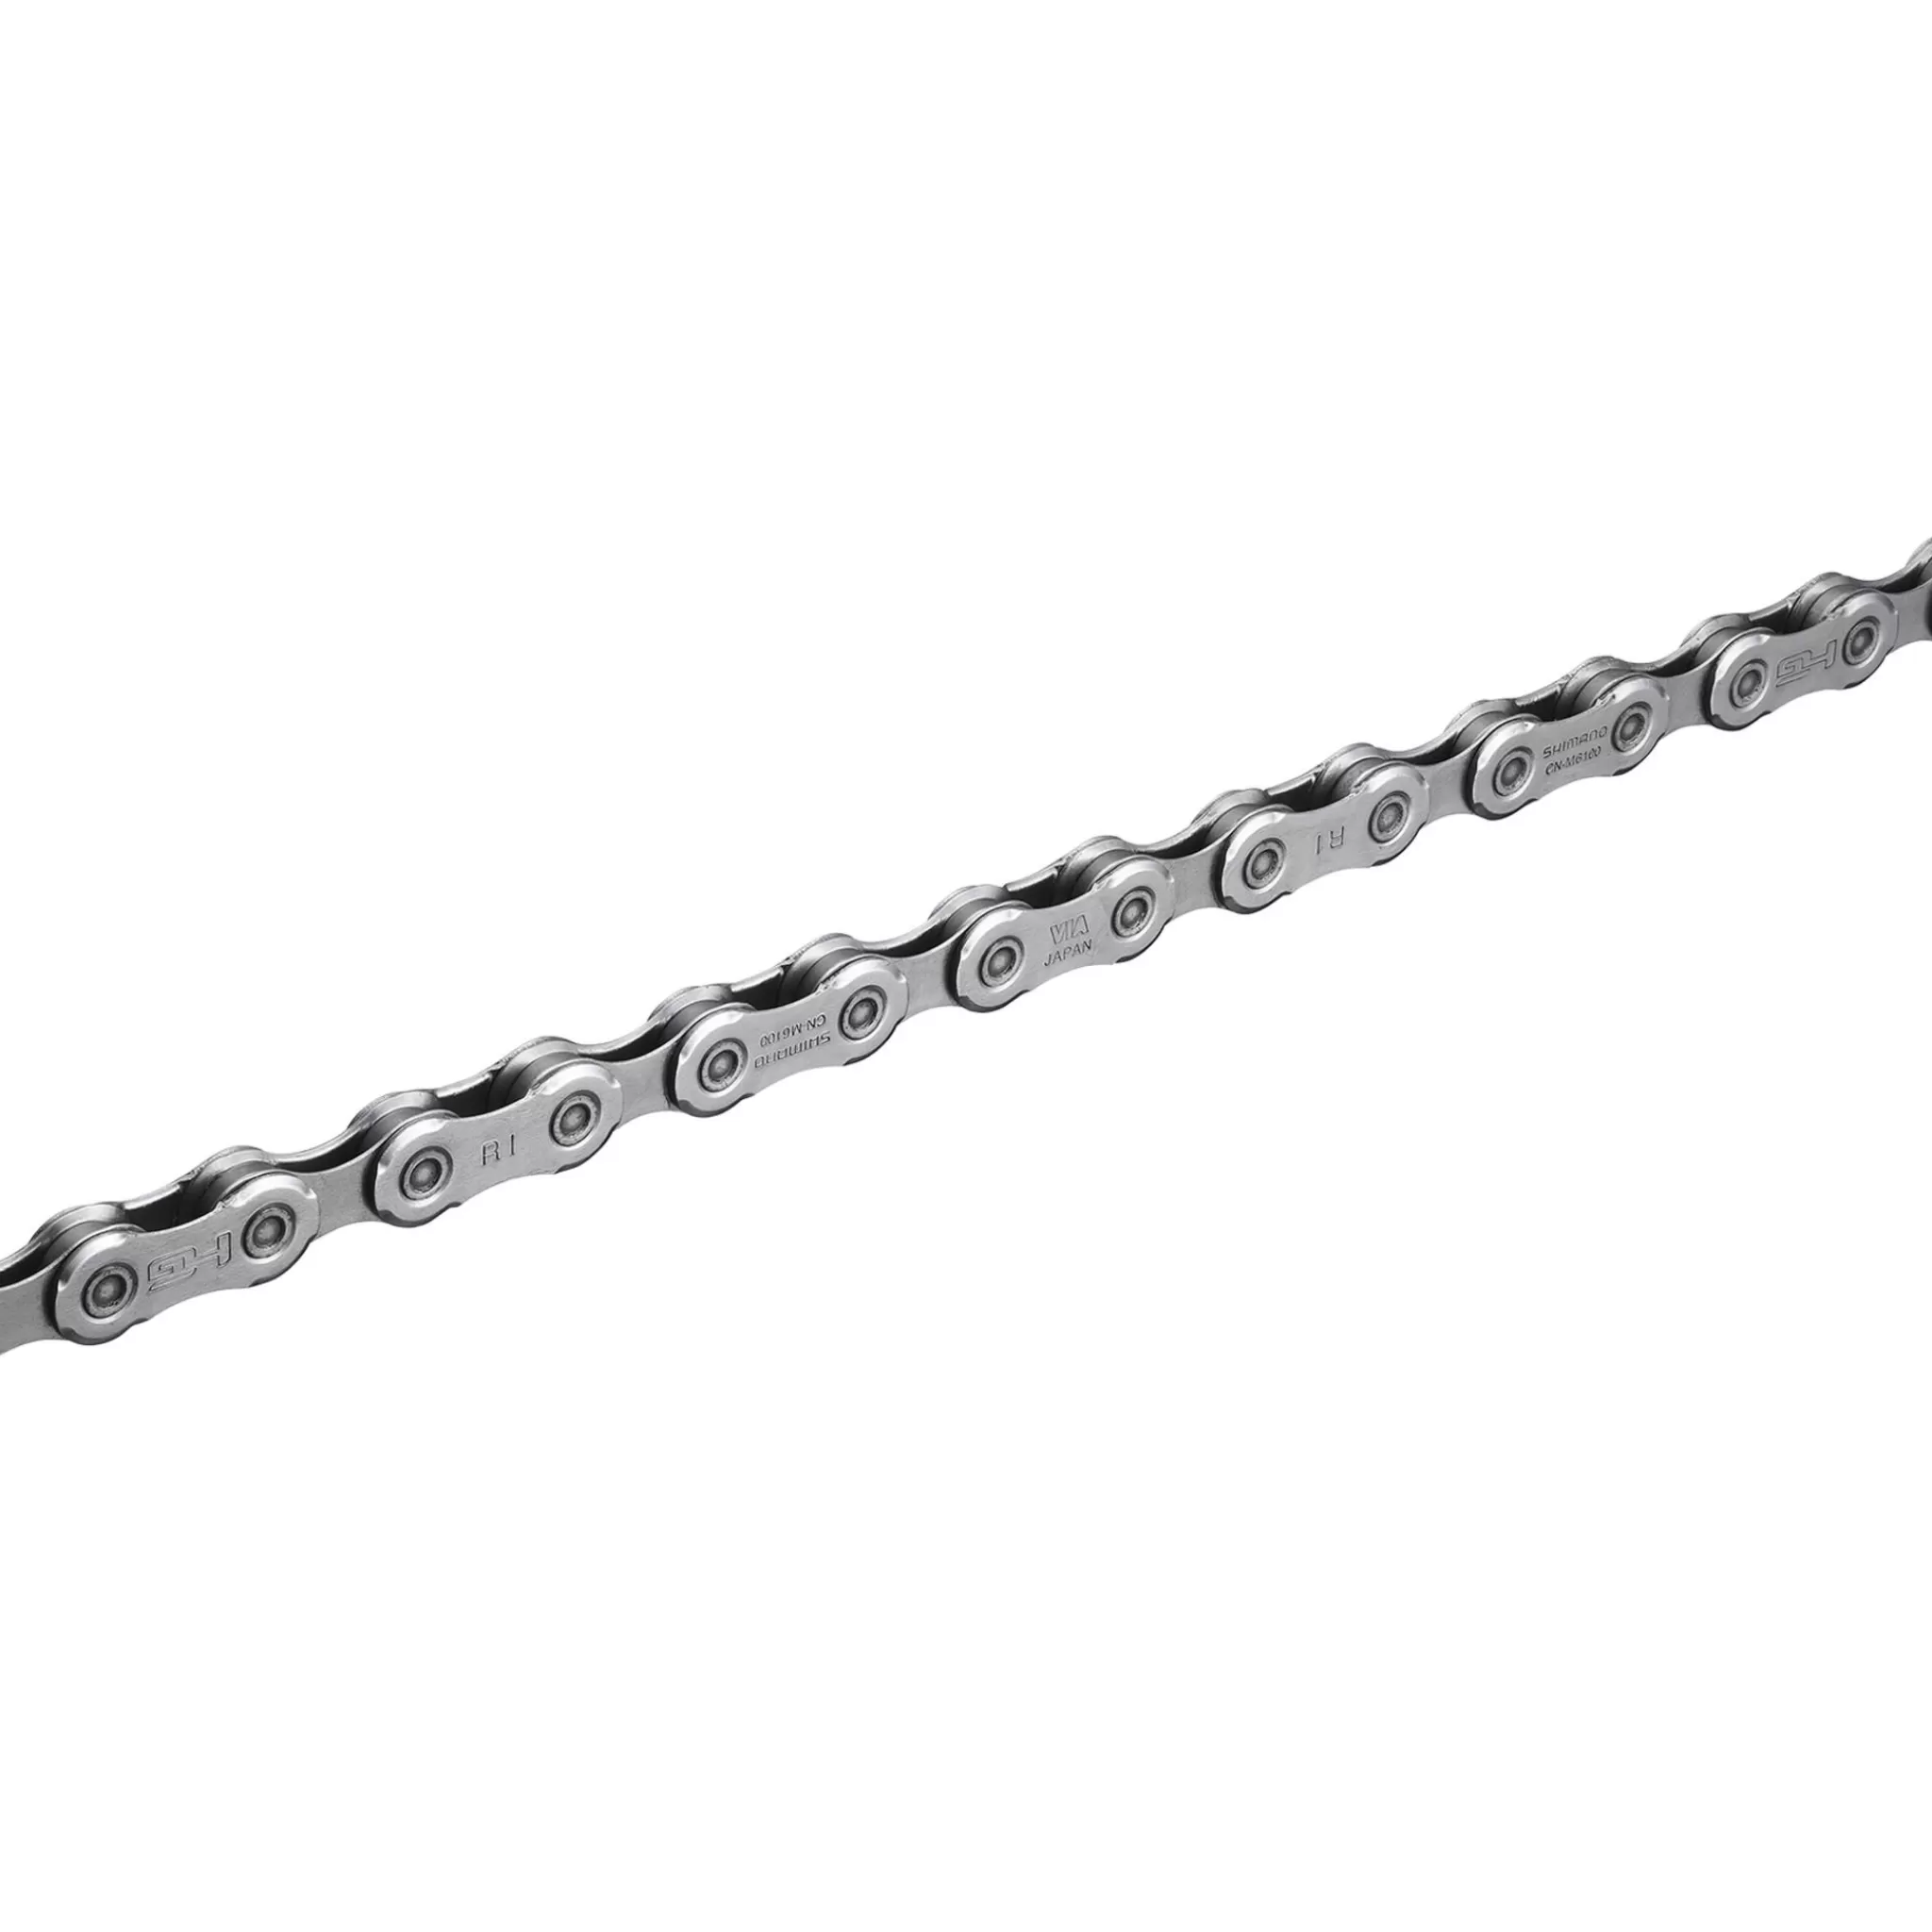 Clearance shimano Cn-M6100 Deore 12 Speed Chain, Sykkelkjede